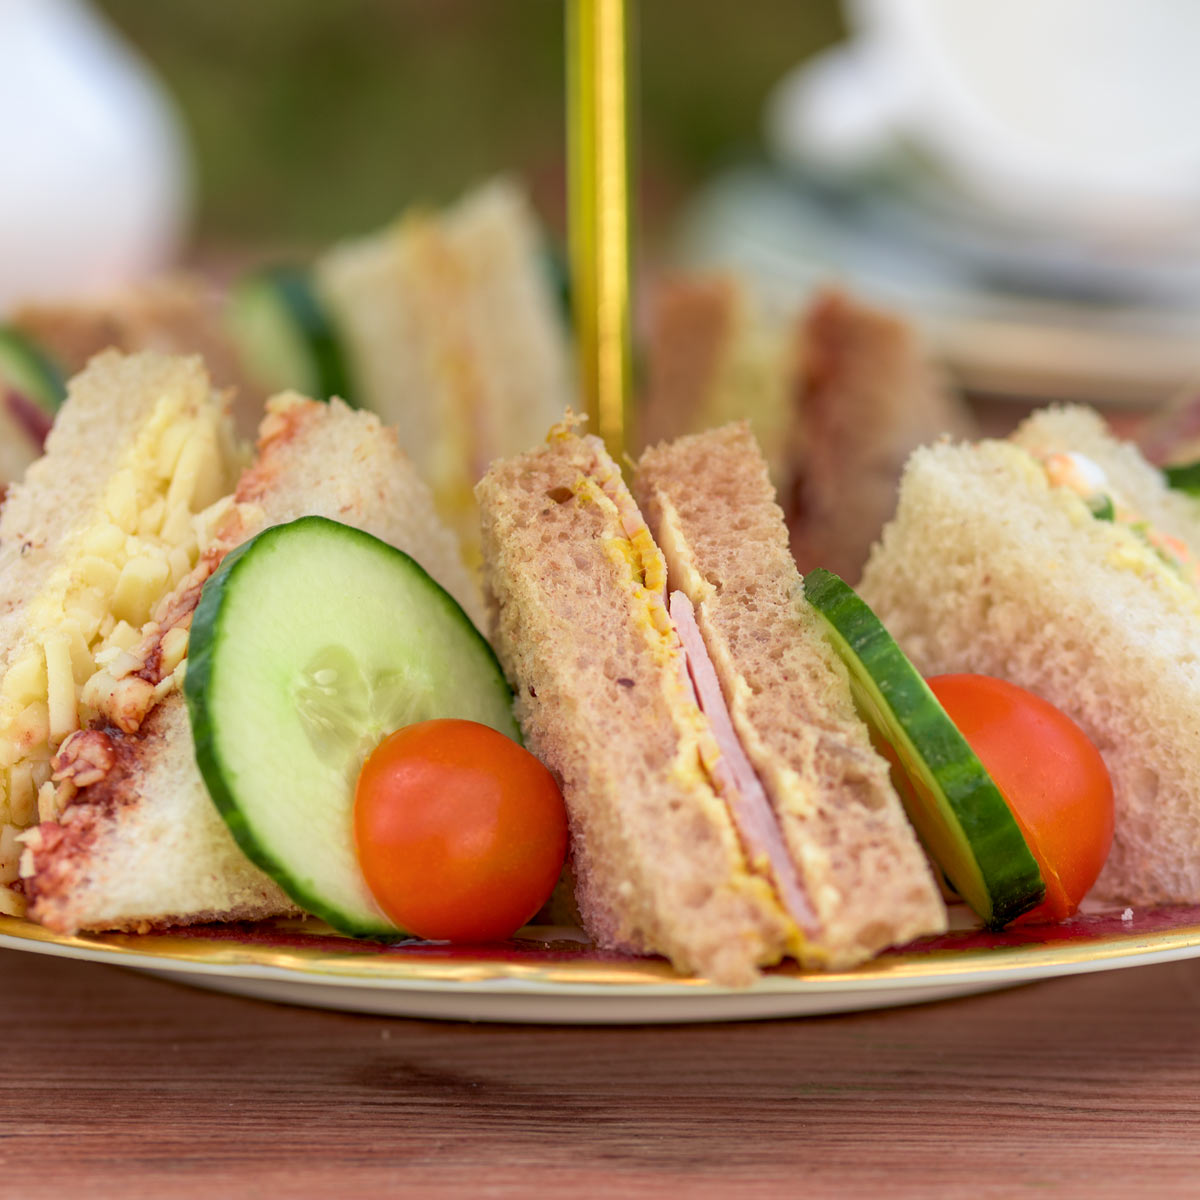 Barnsdale Afternoon Tea. Close up of dainty sandwiches, with cucumber and tomato garnish.